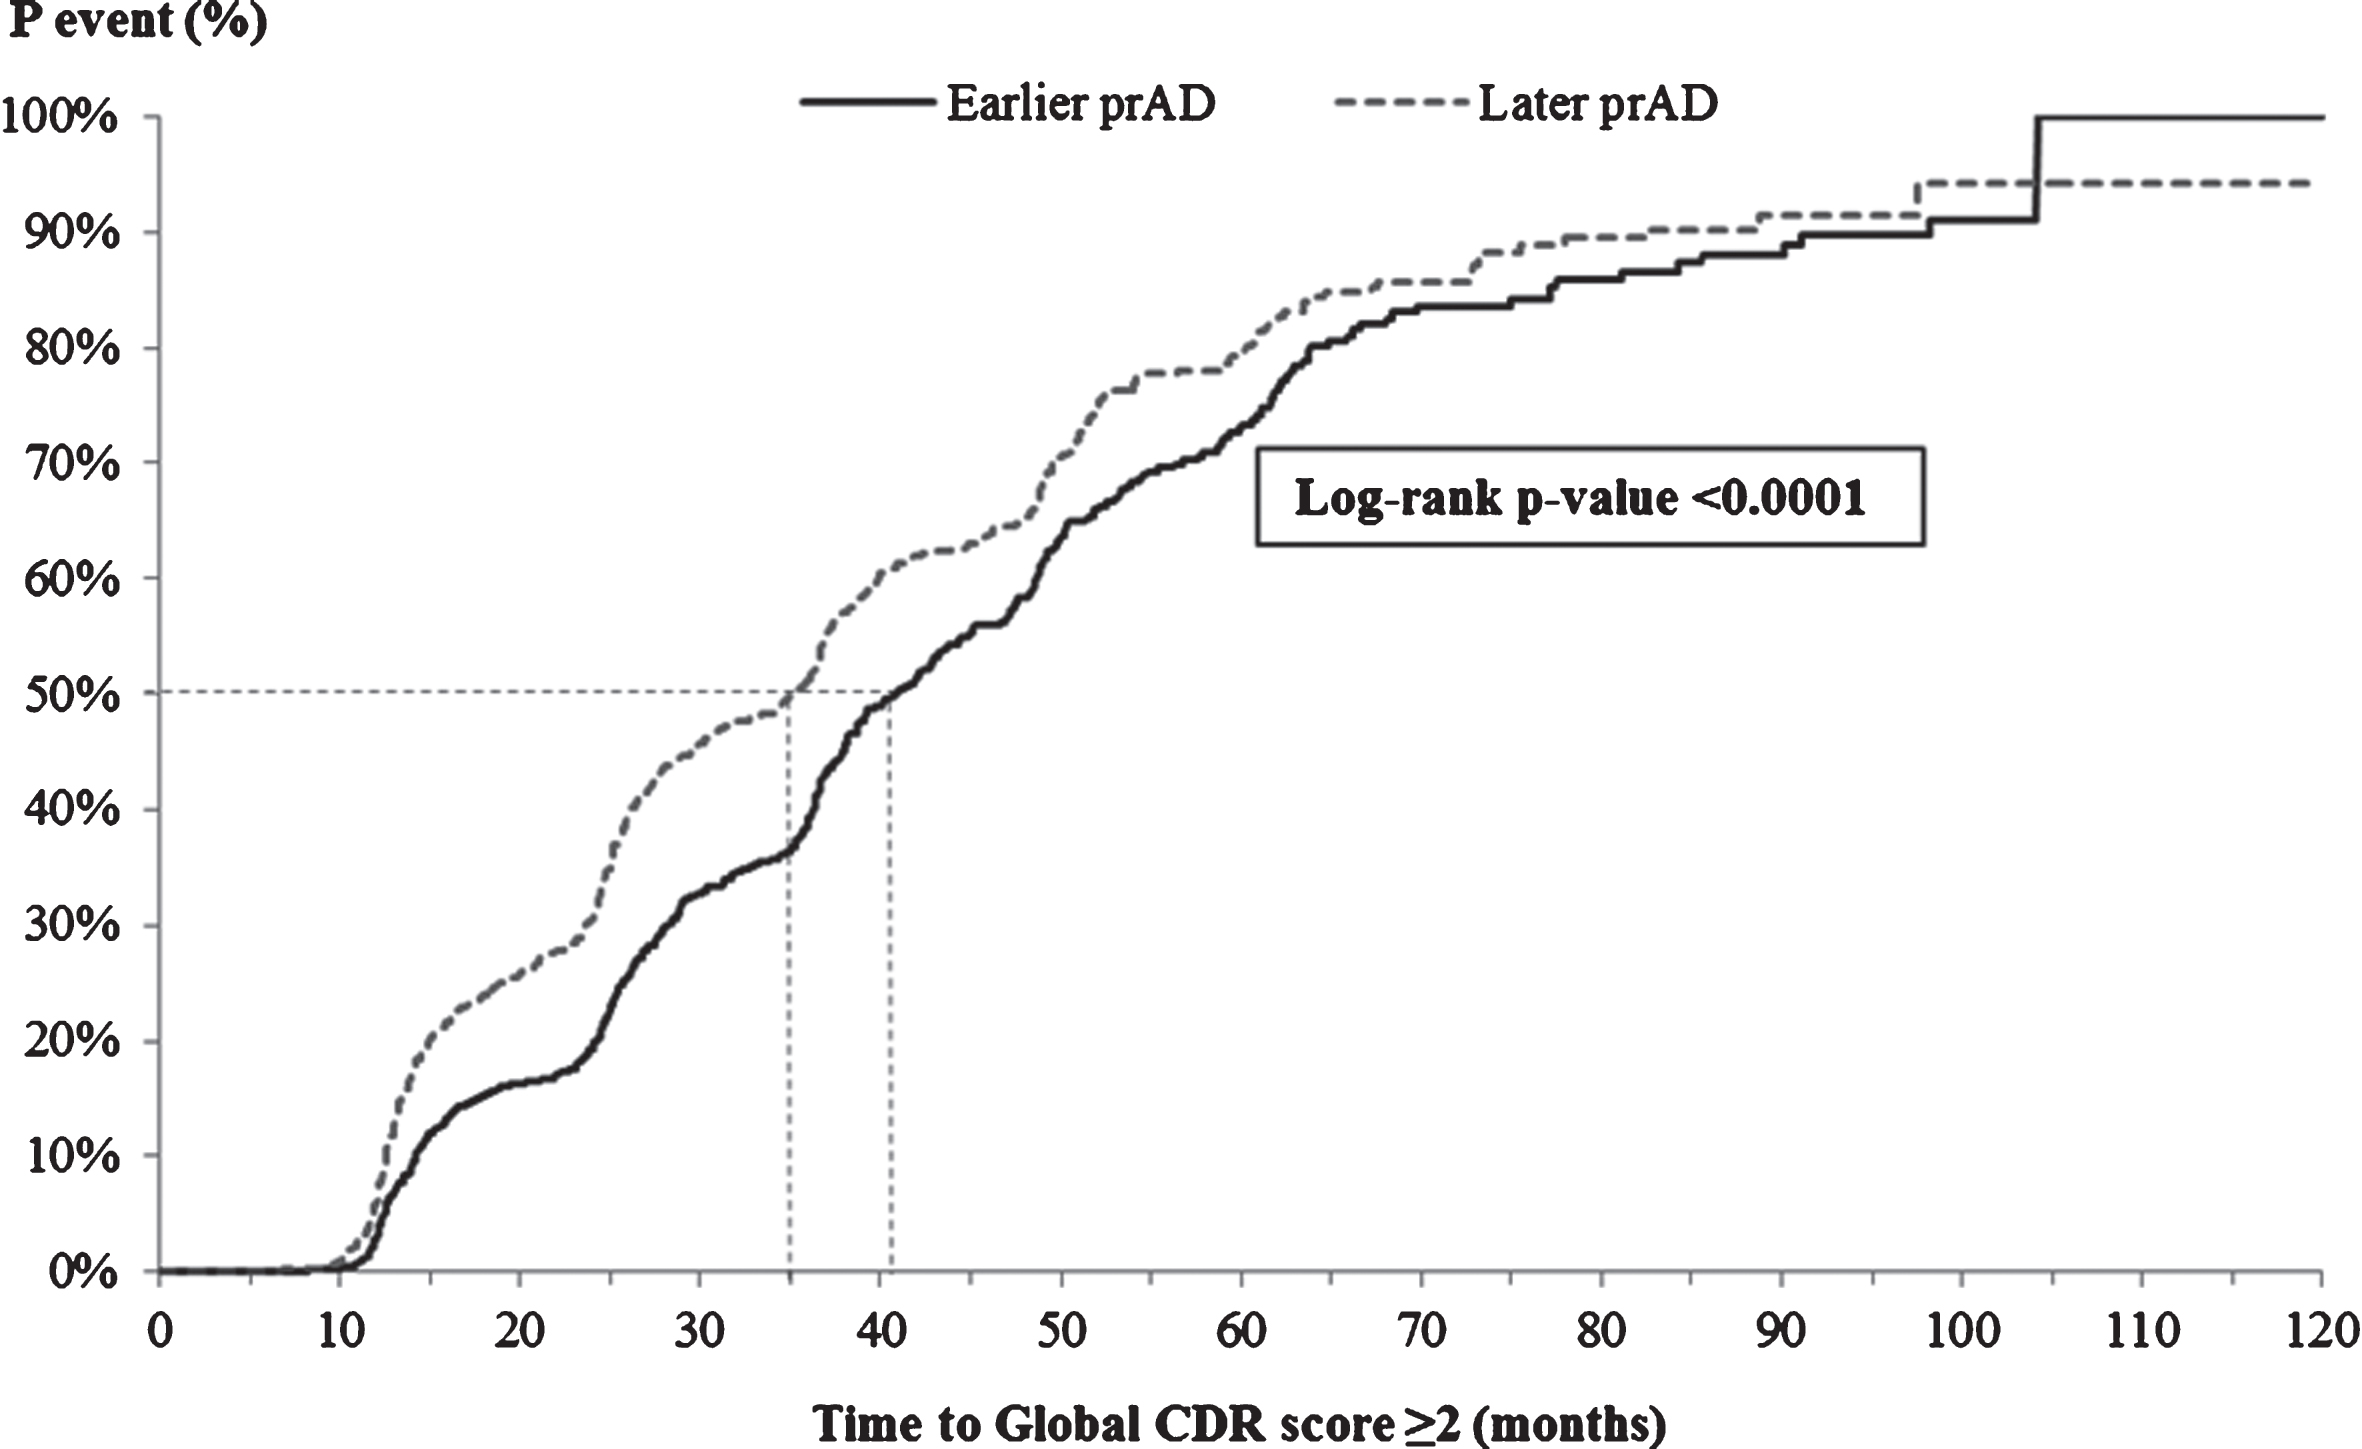 Time from index visit to global CDR score ≥2. CDR, Clinical Dementia Rating; p, probability; prAD, probable Alzheimer’s disease. Note: Patients with a global CDR score of ≥2 at the first visit with prAD were censored at that visit. Otherwise, patients were censored at the last visit with complete information about CDR.